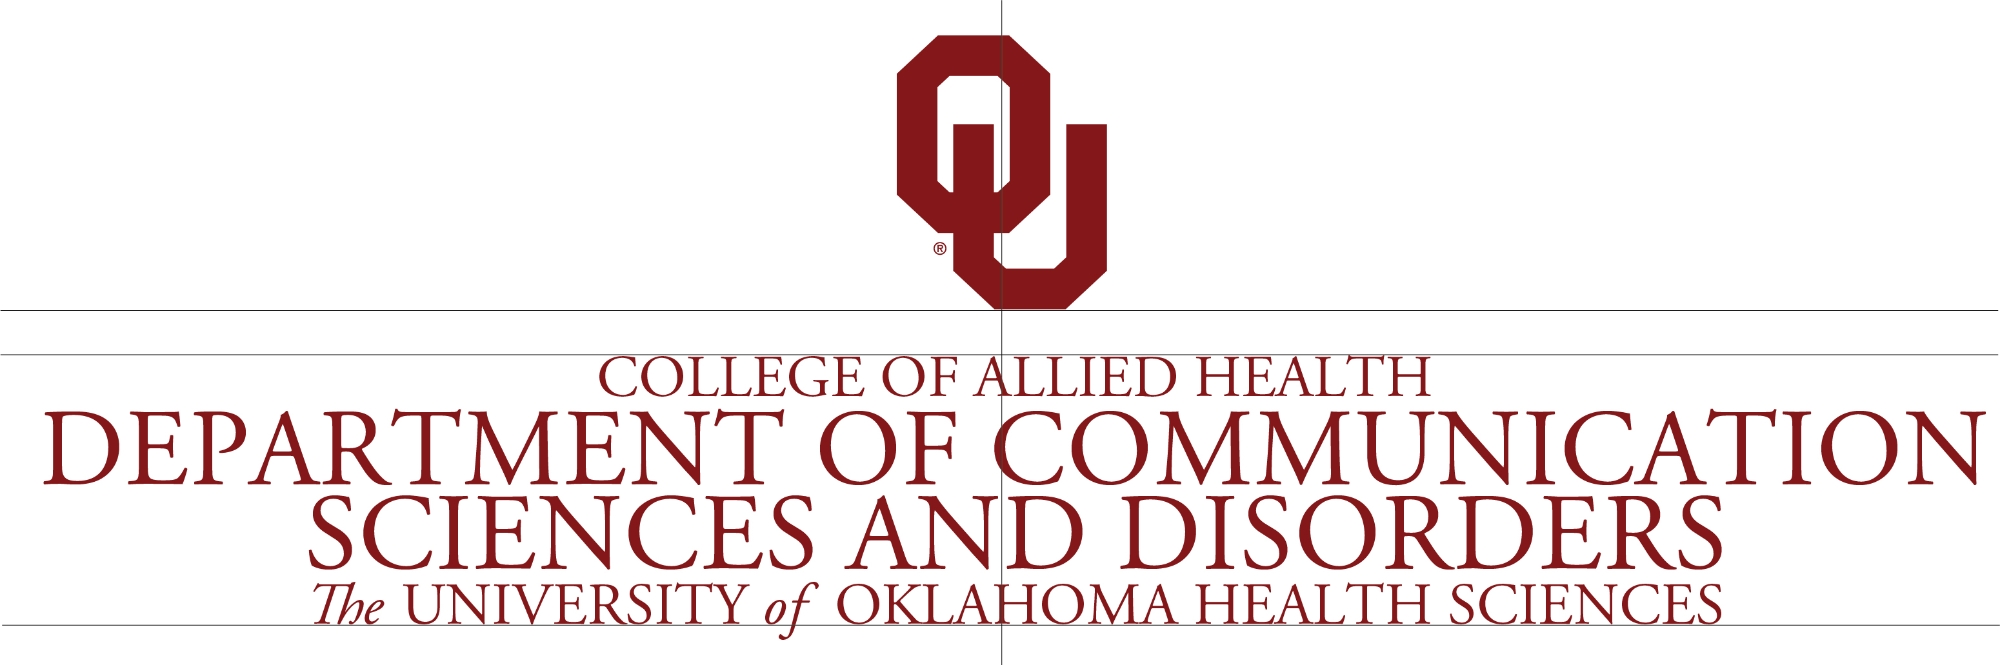 Interlocking OU, College of Allied Health, Department of Communication Sciences and Disorders, The University of Oklahoma Health Sciences wordmark, four-line example.